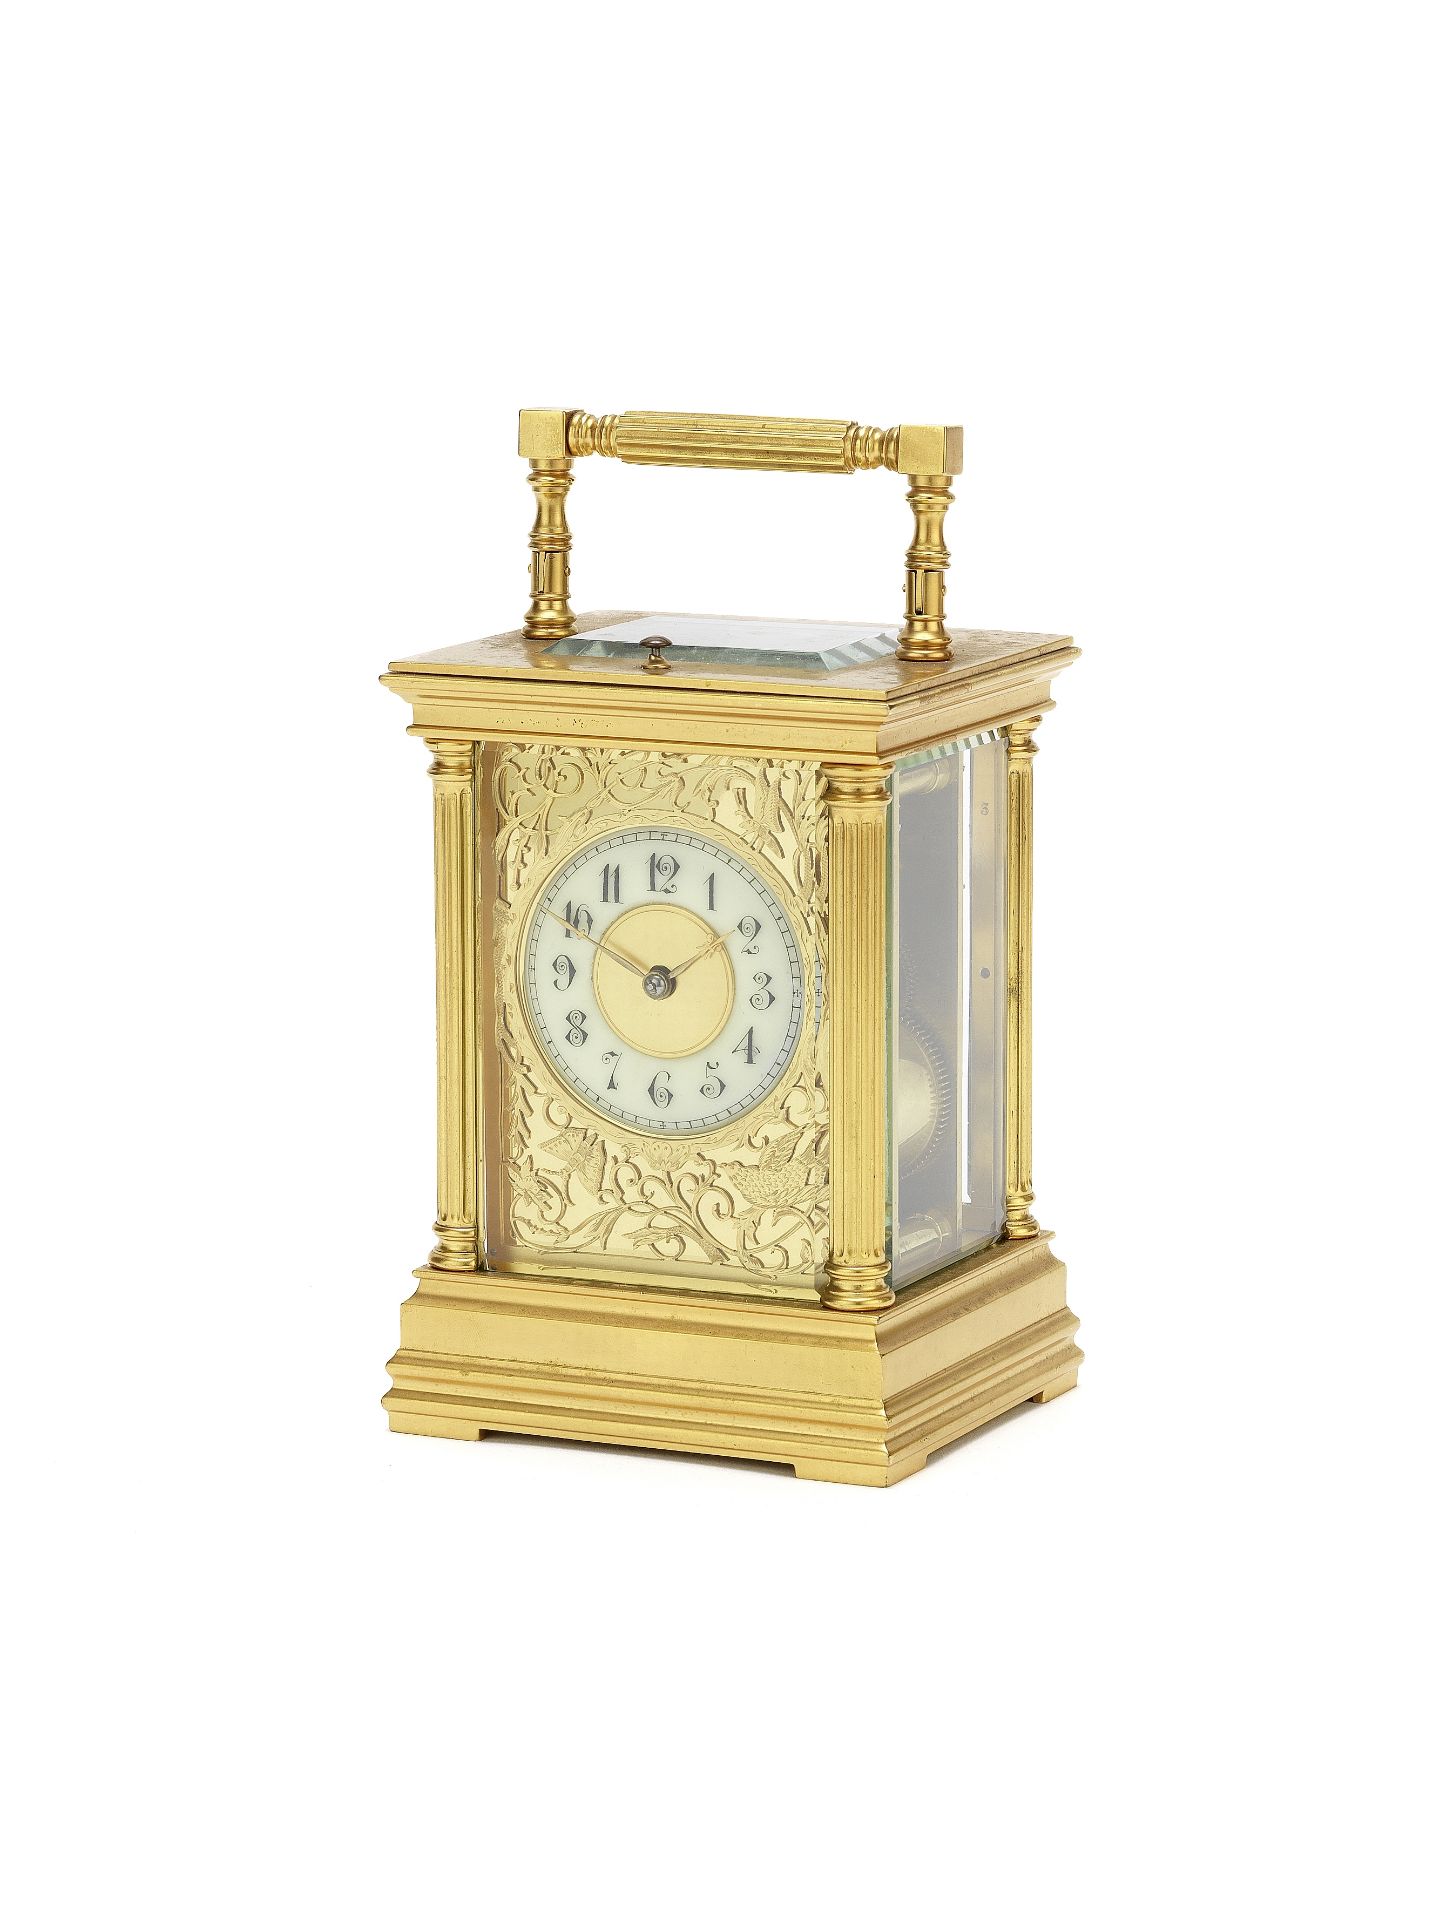 A late 19th century French repeating Carriage Clock Stamped with the trademark Ed.M, numbered 146